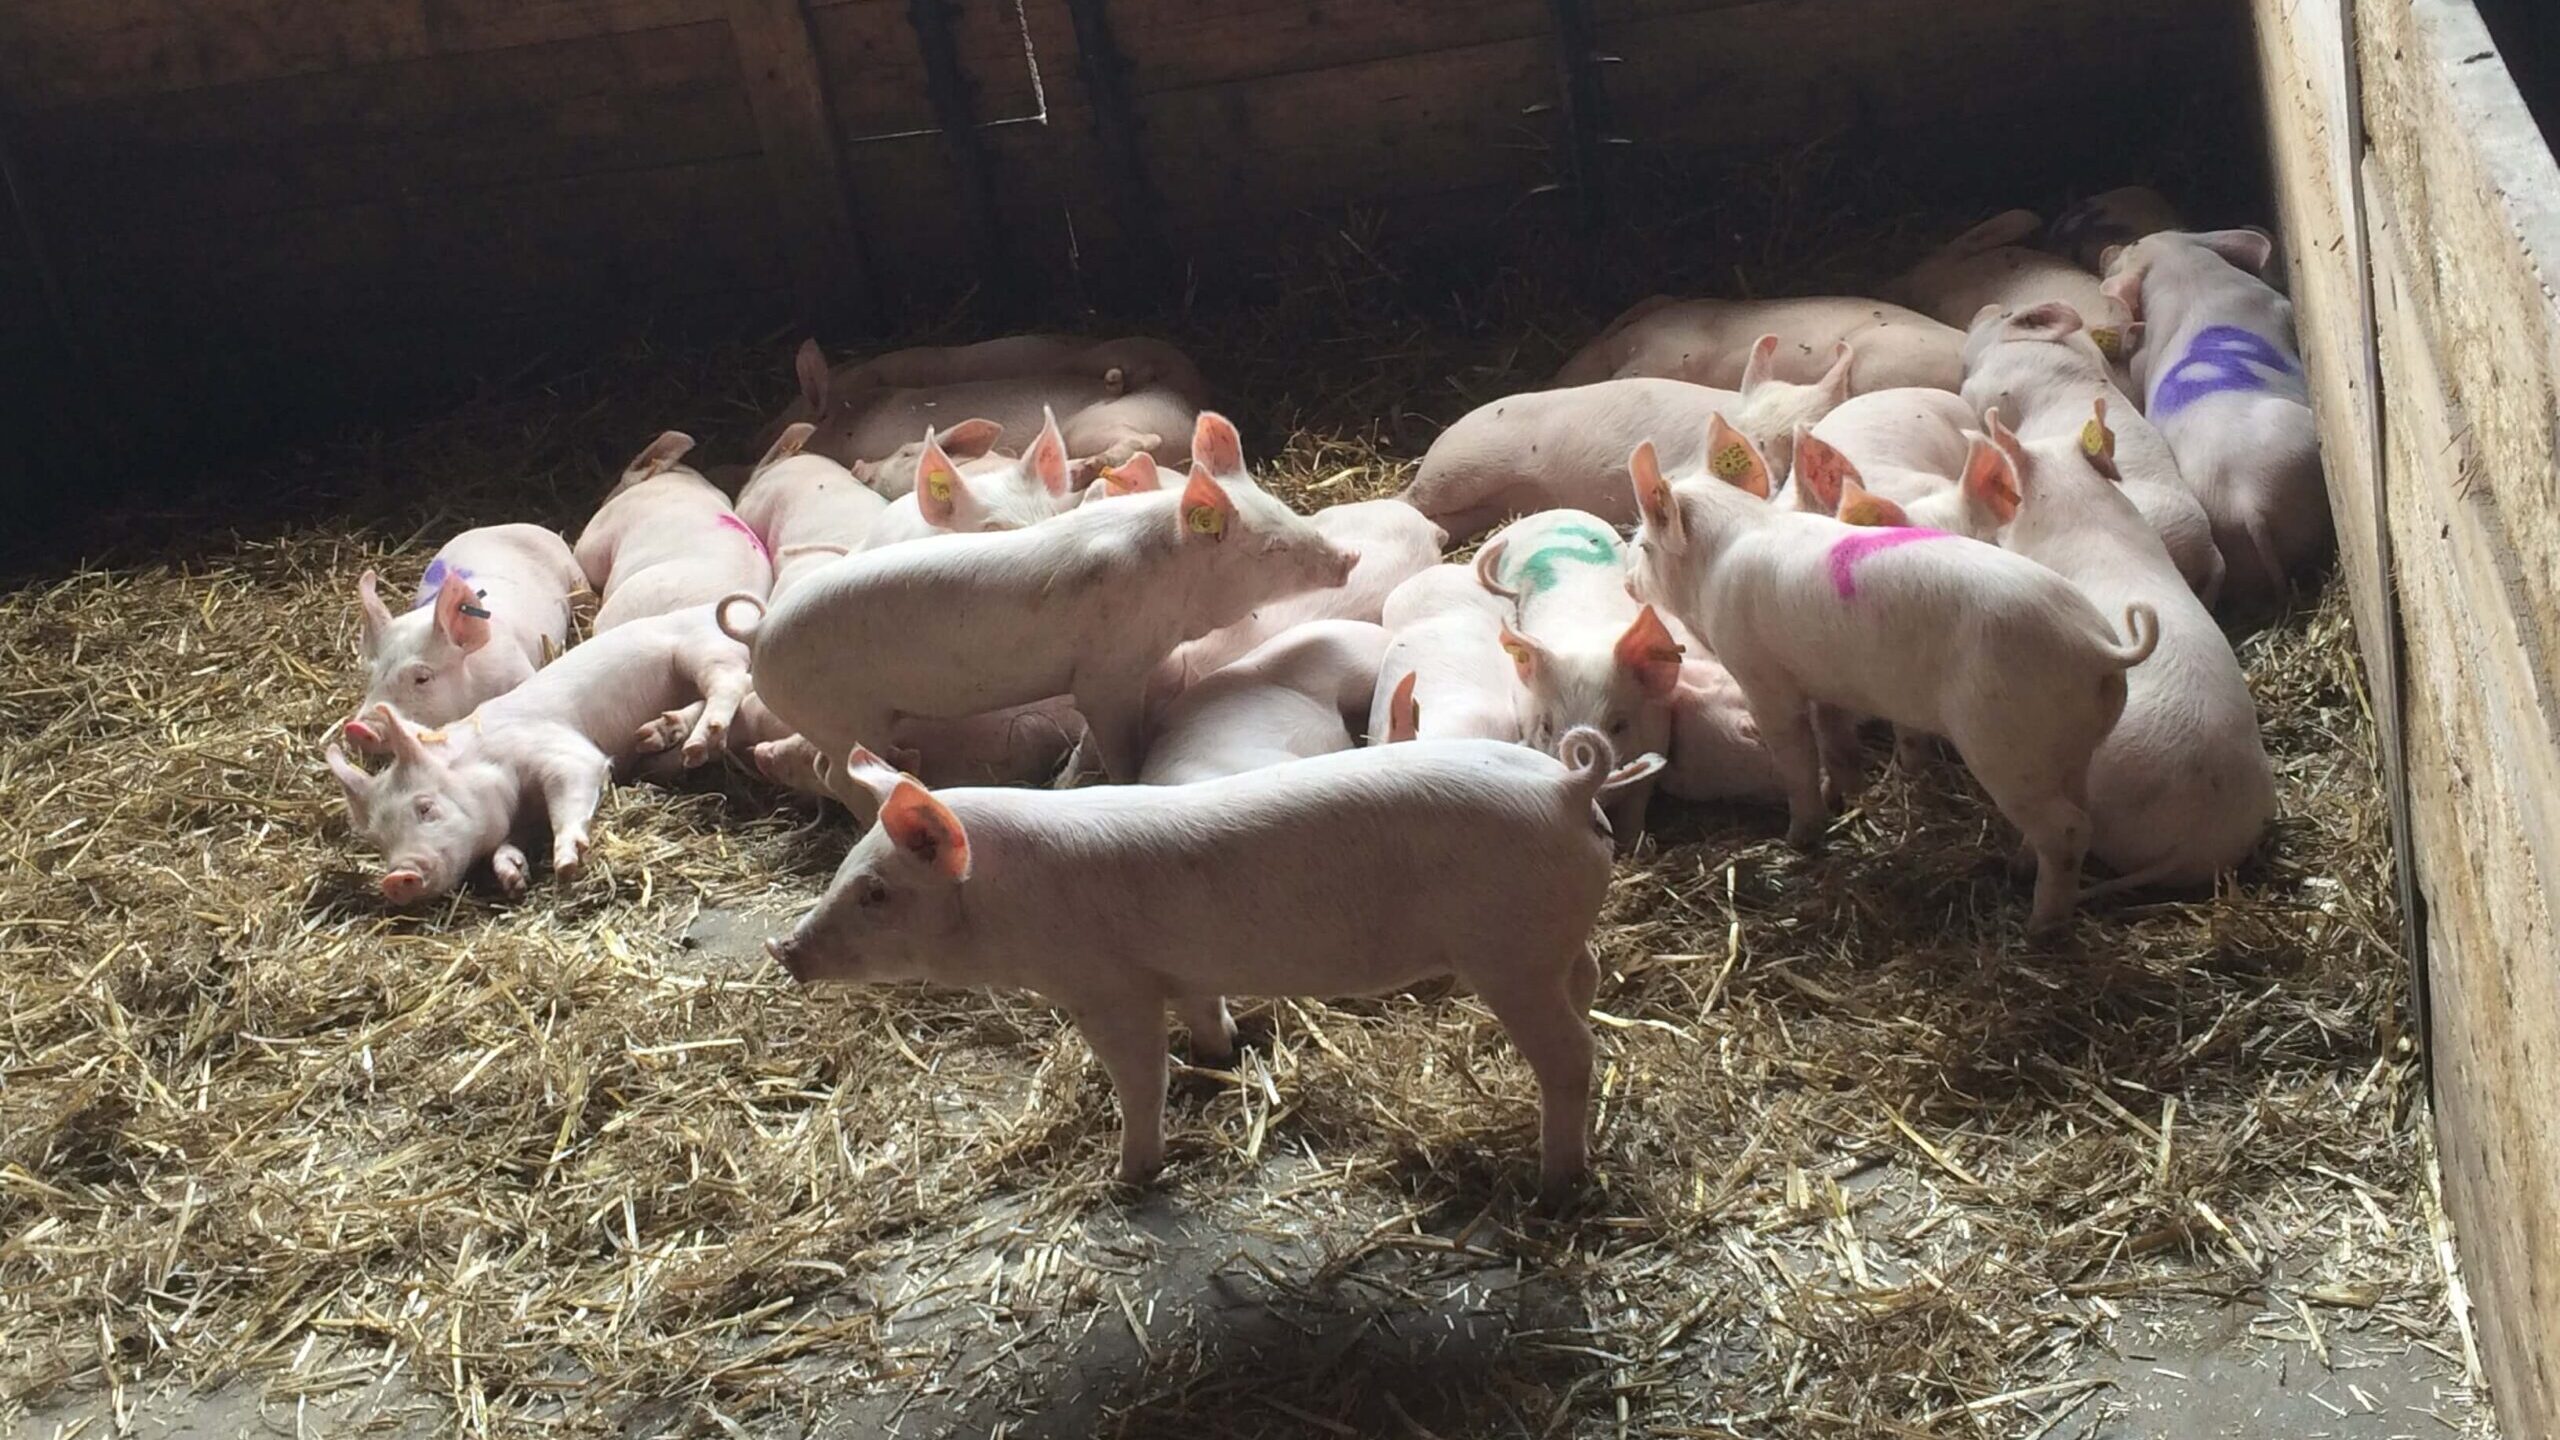 European researchers discovered that pigs' barks, grunts and other vocalizations reveal emotions that can be monitored by farmers to improve production. (Elodie Briefer)